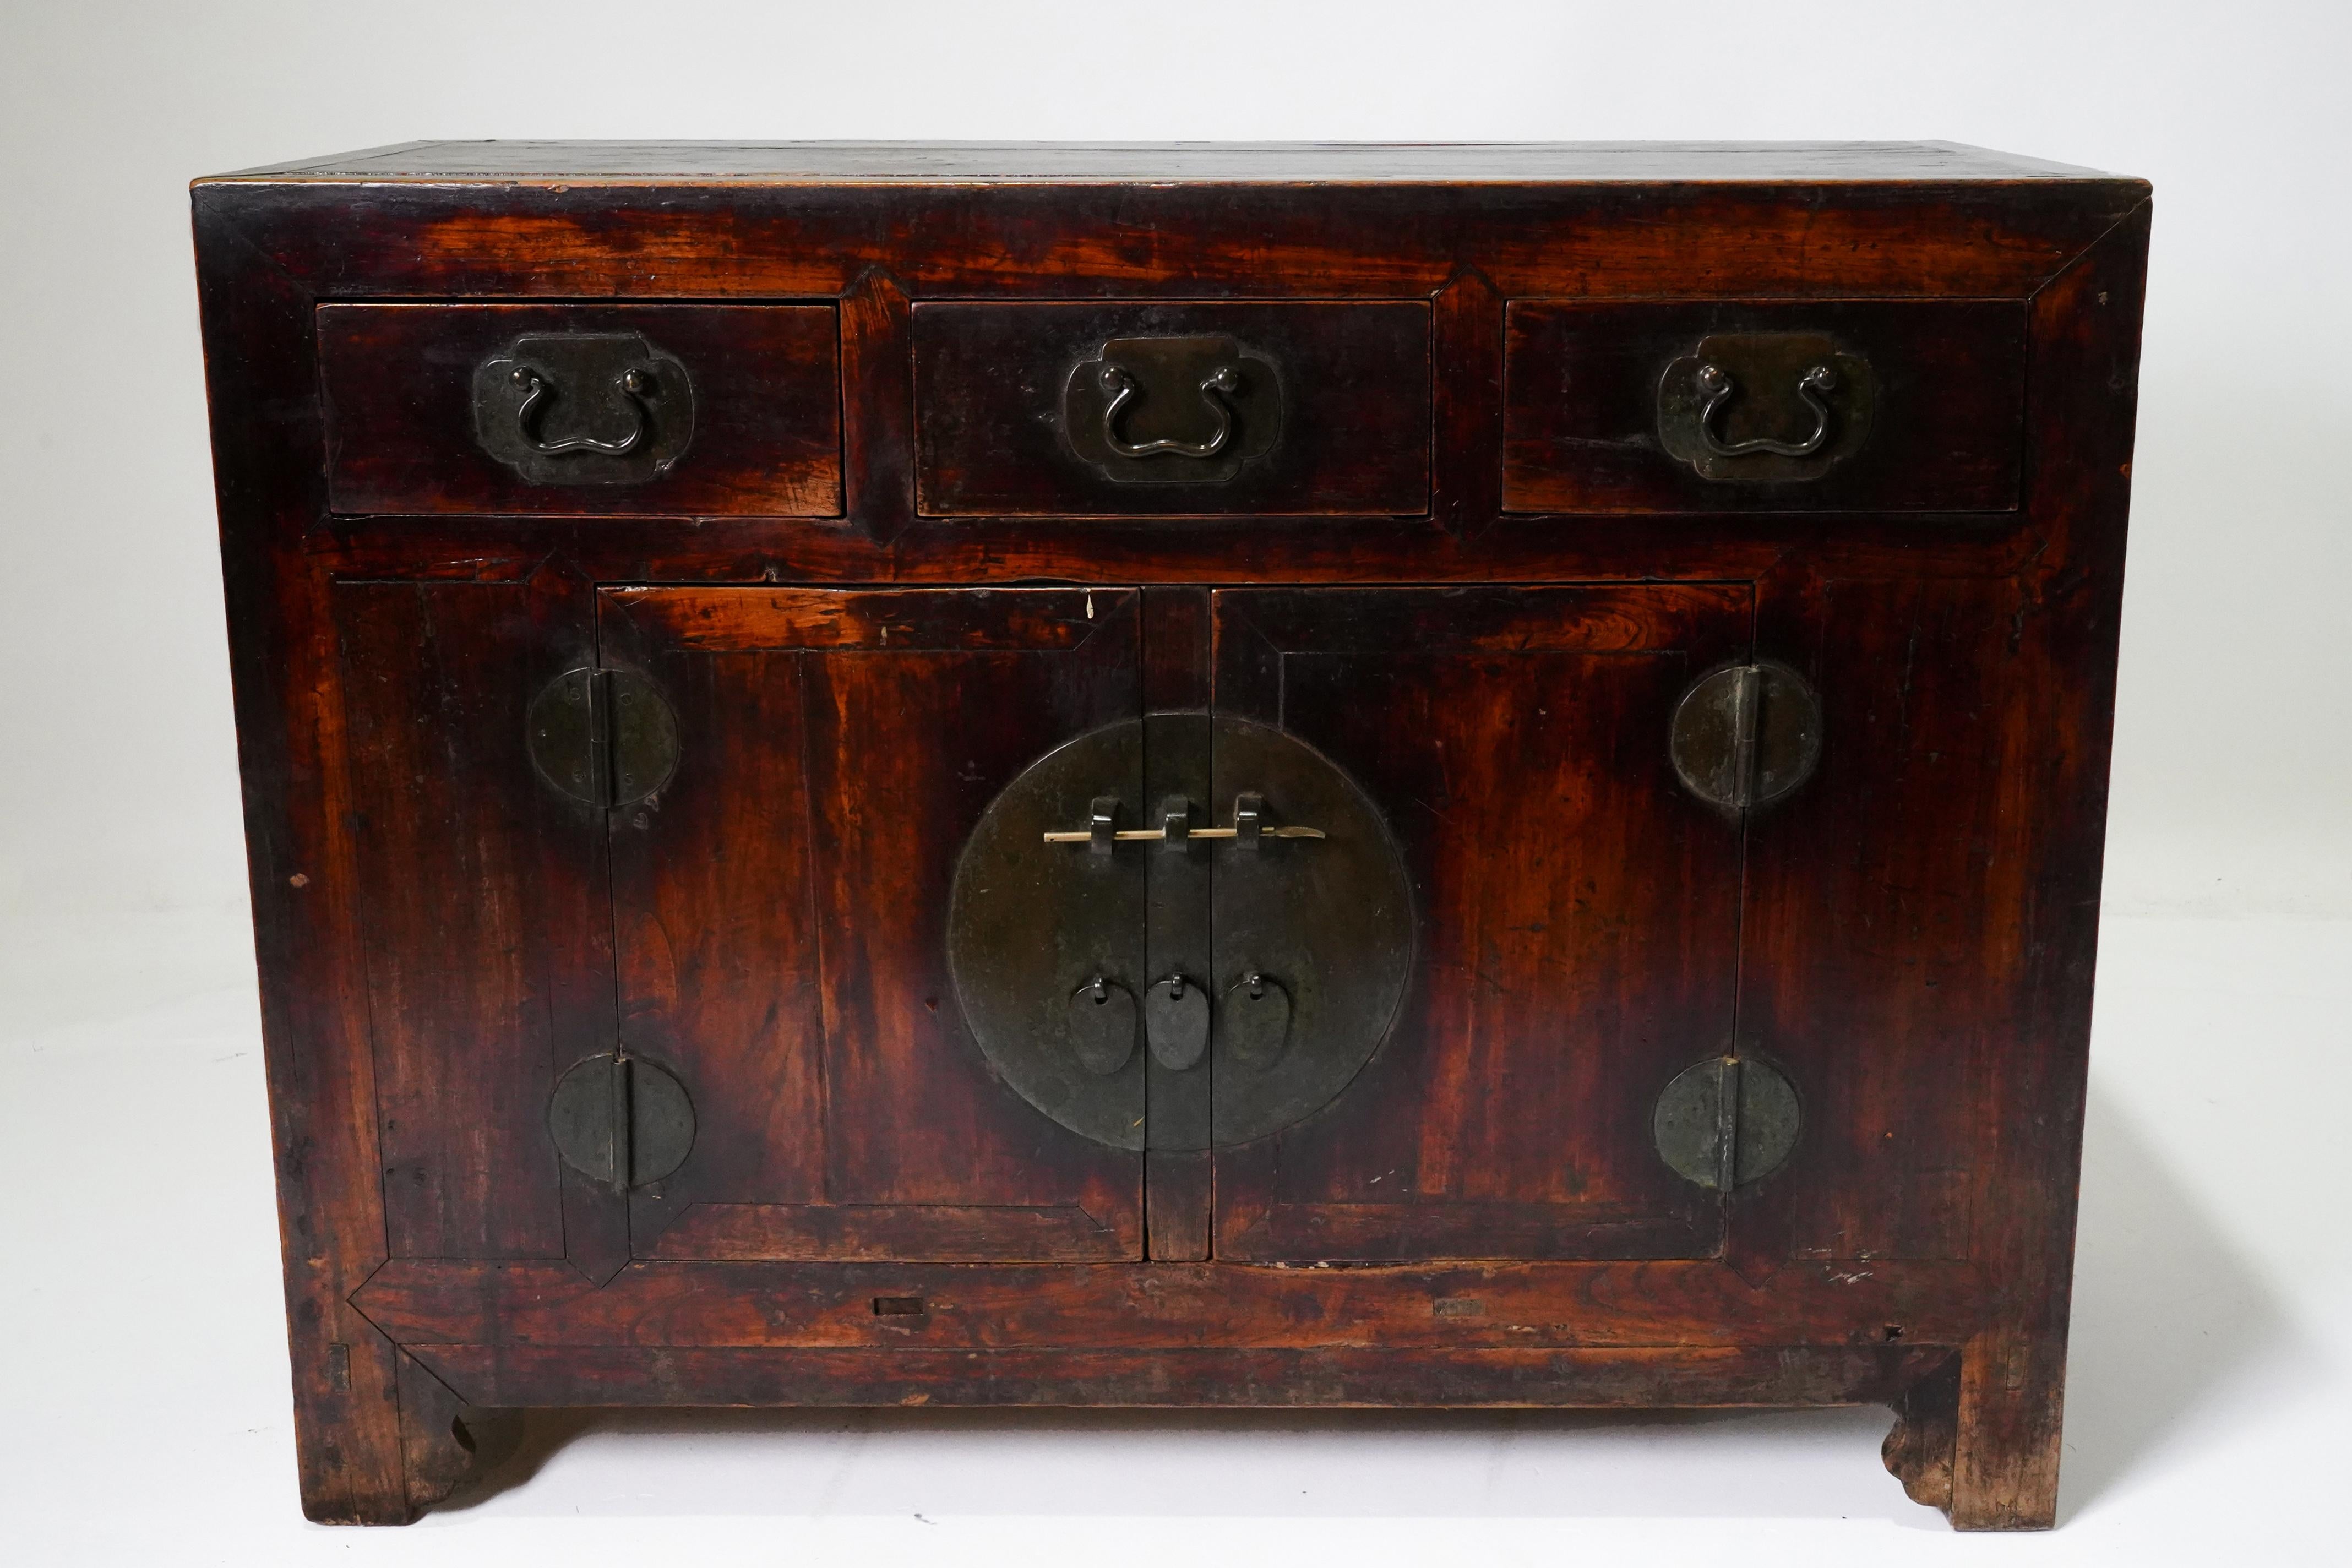 An exceptionally original 19th century household storage coffer in the Tianjin Style. Tianjin is a large city in Northeast China that acts as the port of Beijing. It was a prosperous city and the furniture made there was known for is solidity and